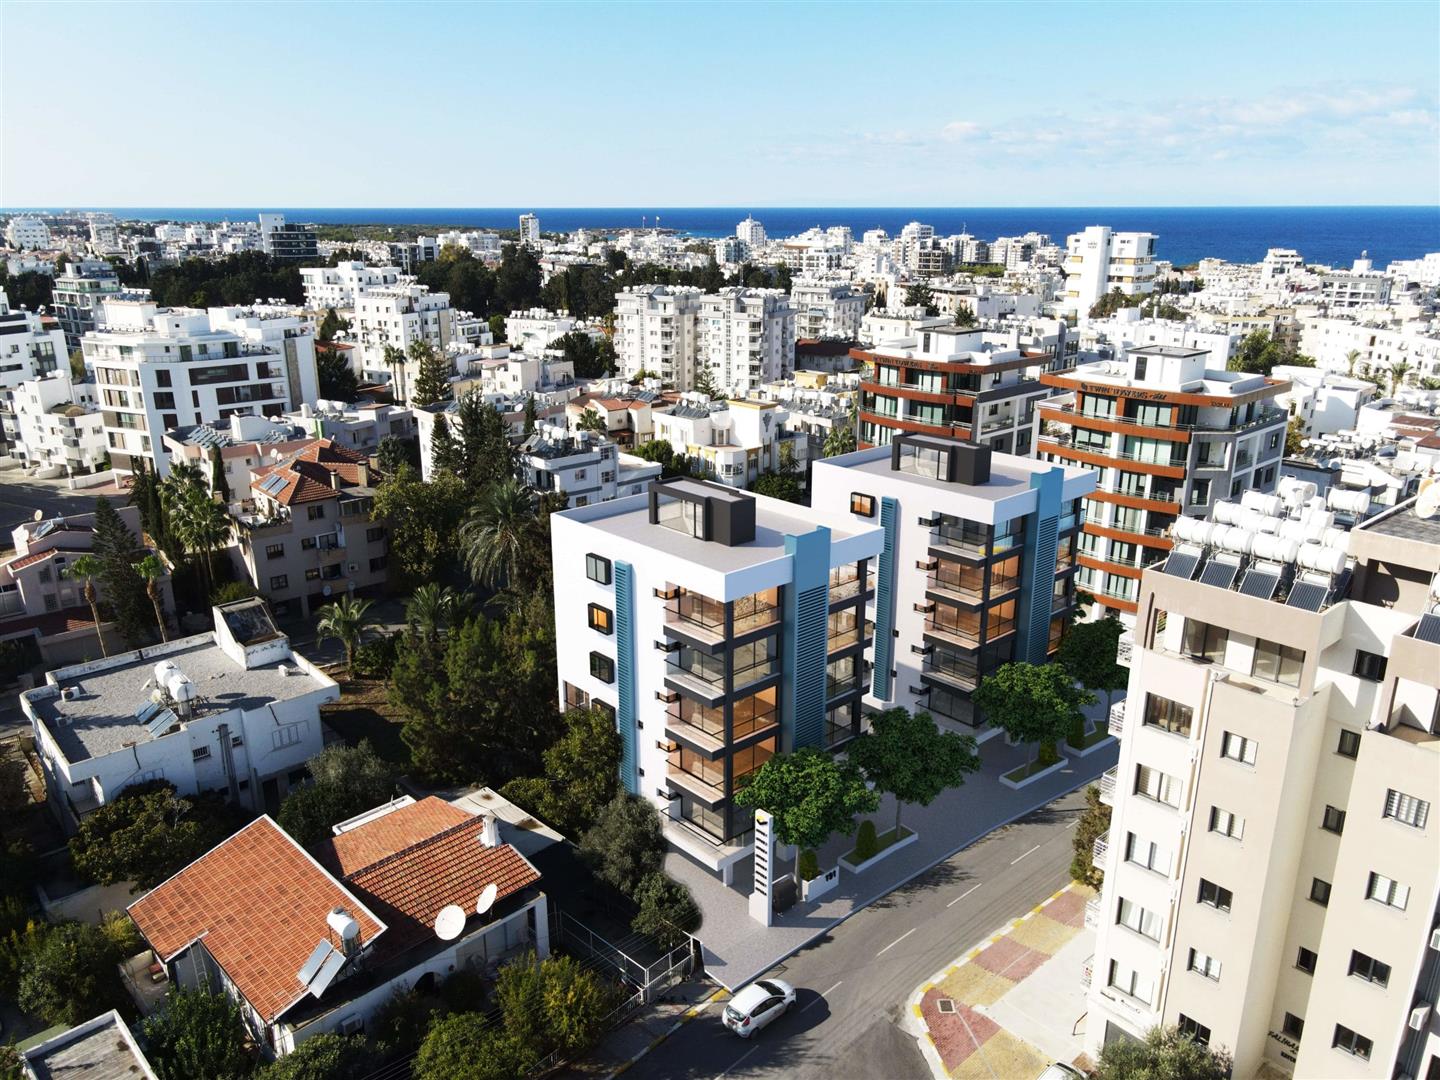 2 bed apartment for sale, Kyrenia - Property Image 1